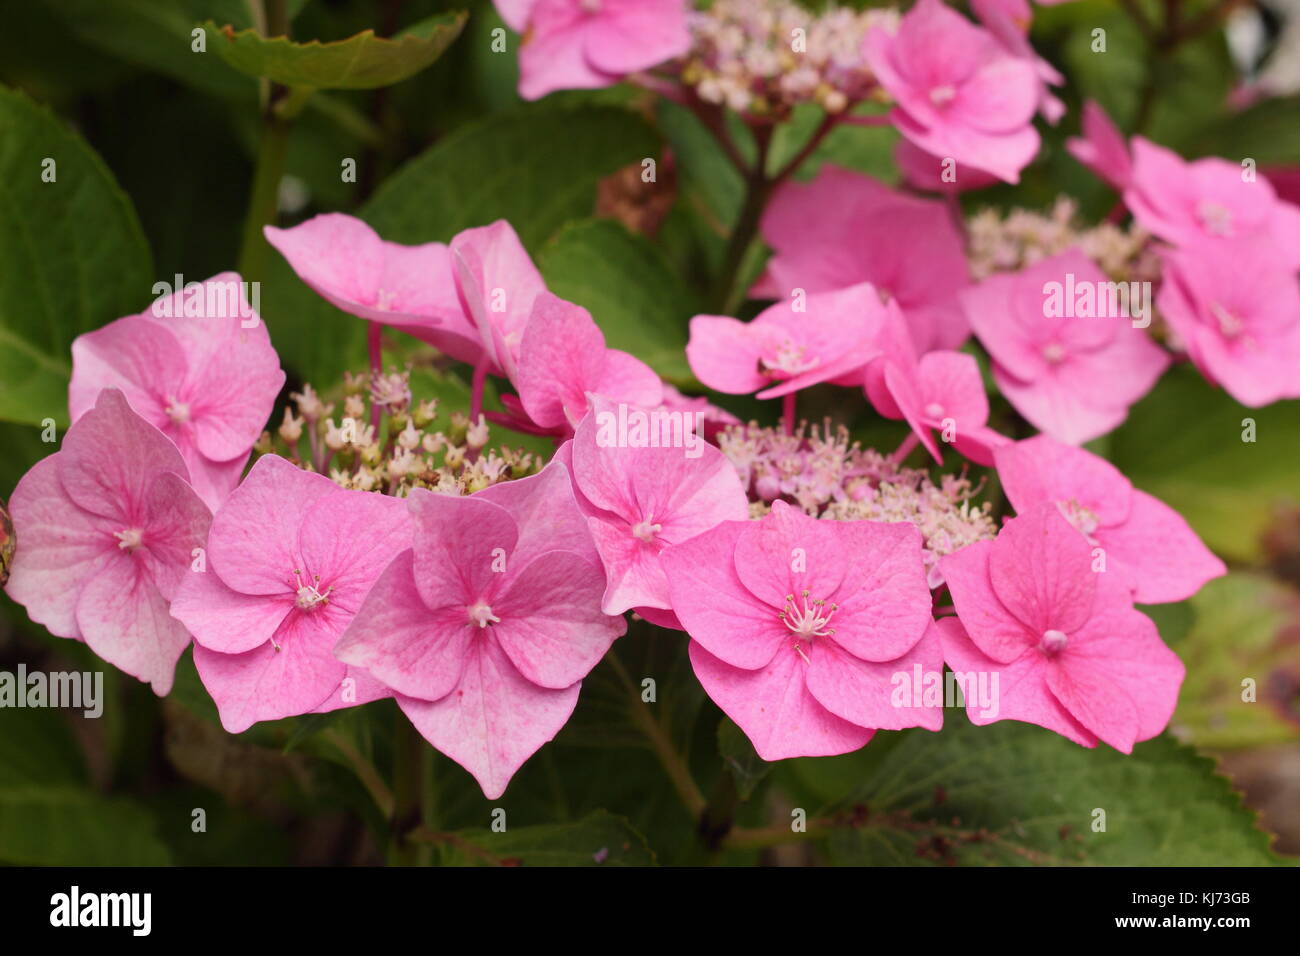 Hydrangea macrophylla 'Rotkehlchen' in full bloom on a bright summer day (August), UK Stock Photo